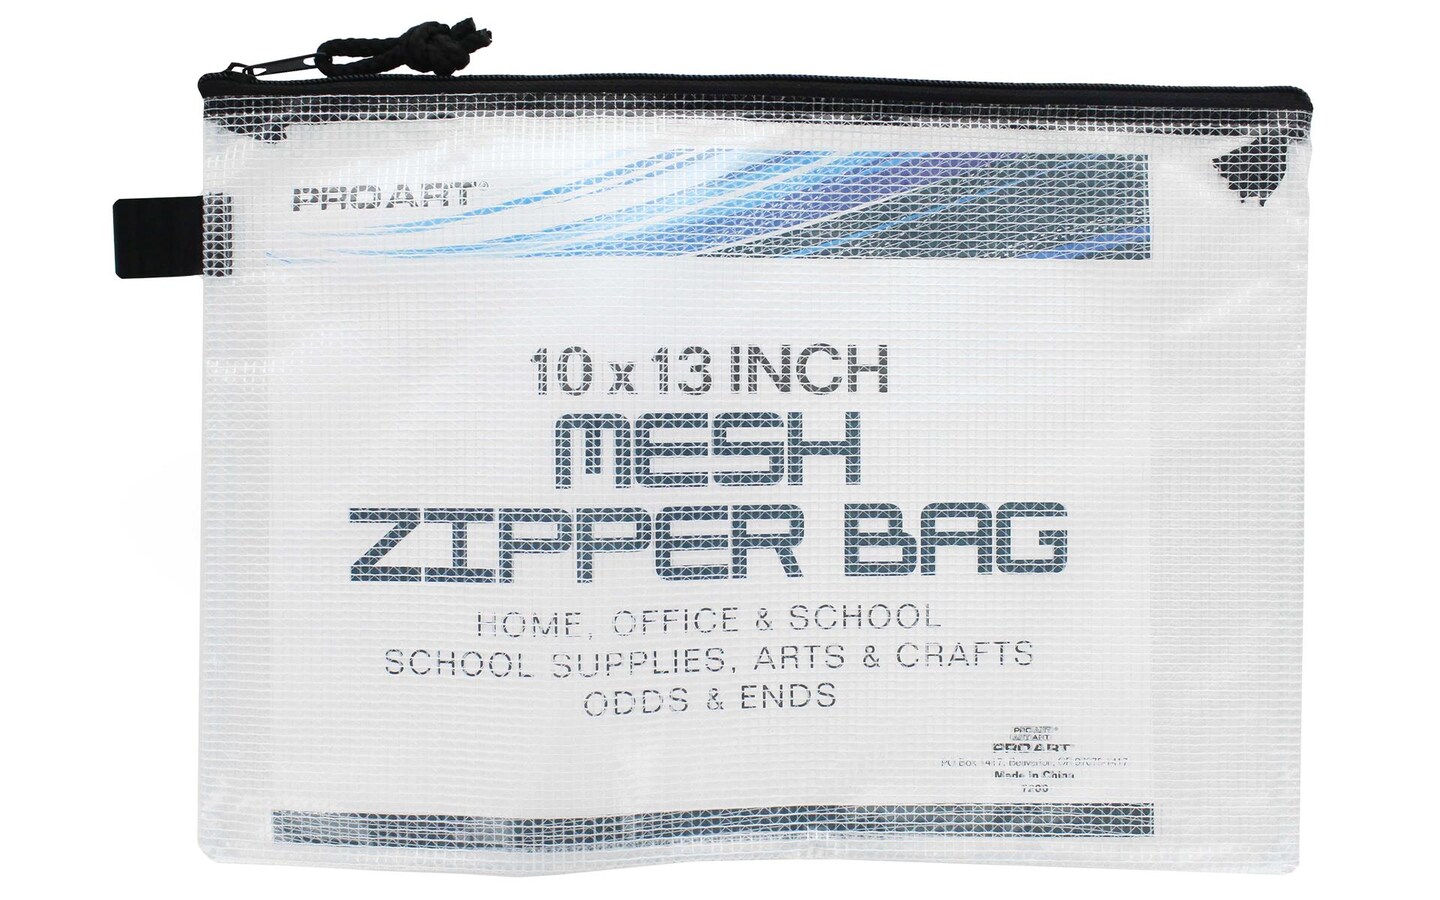 Pro Art Mesh/Vinyl Bag with Handle and Zipper 19 by 25-inch